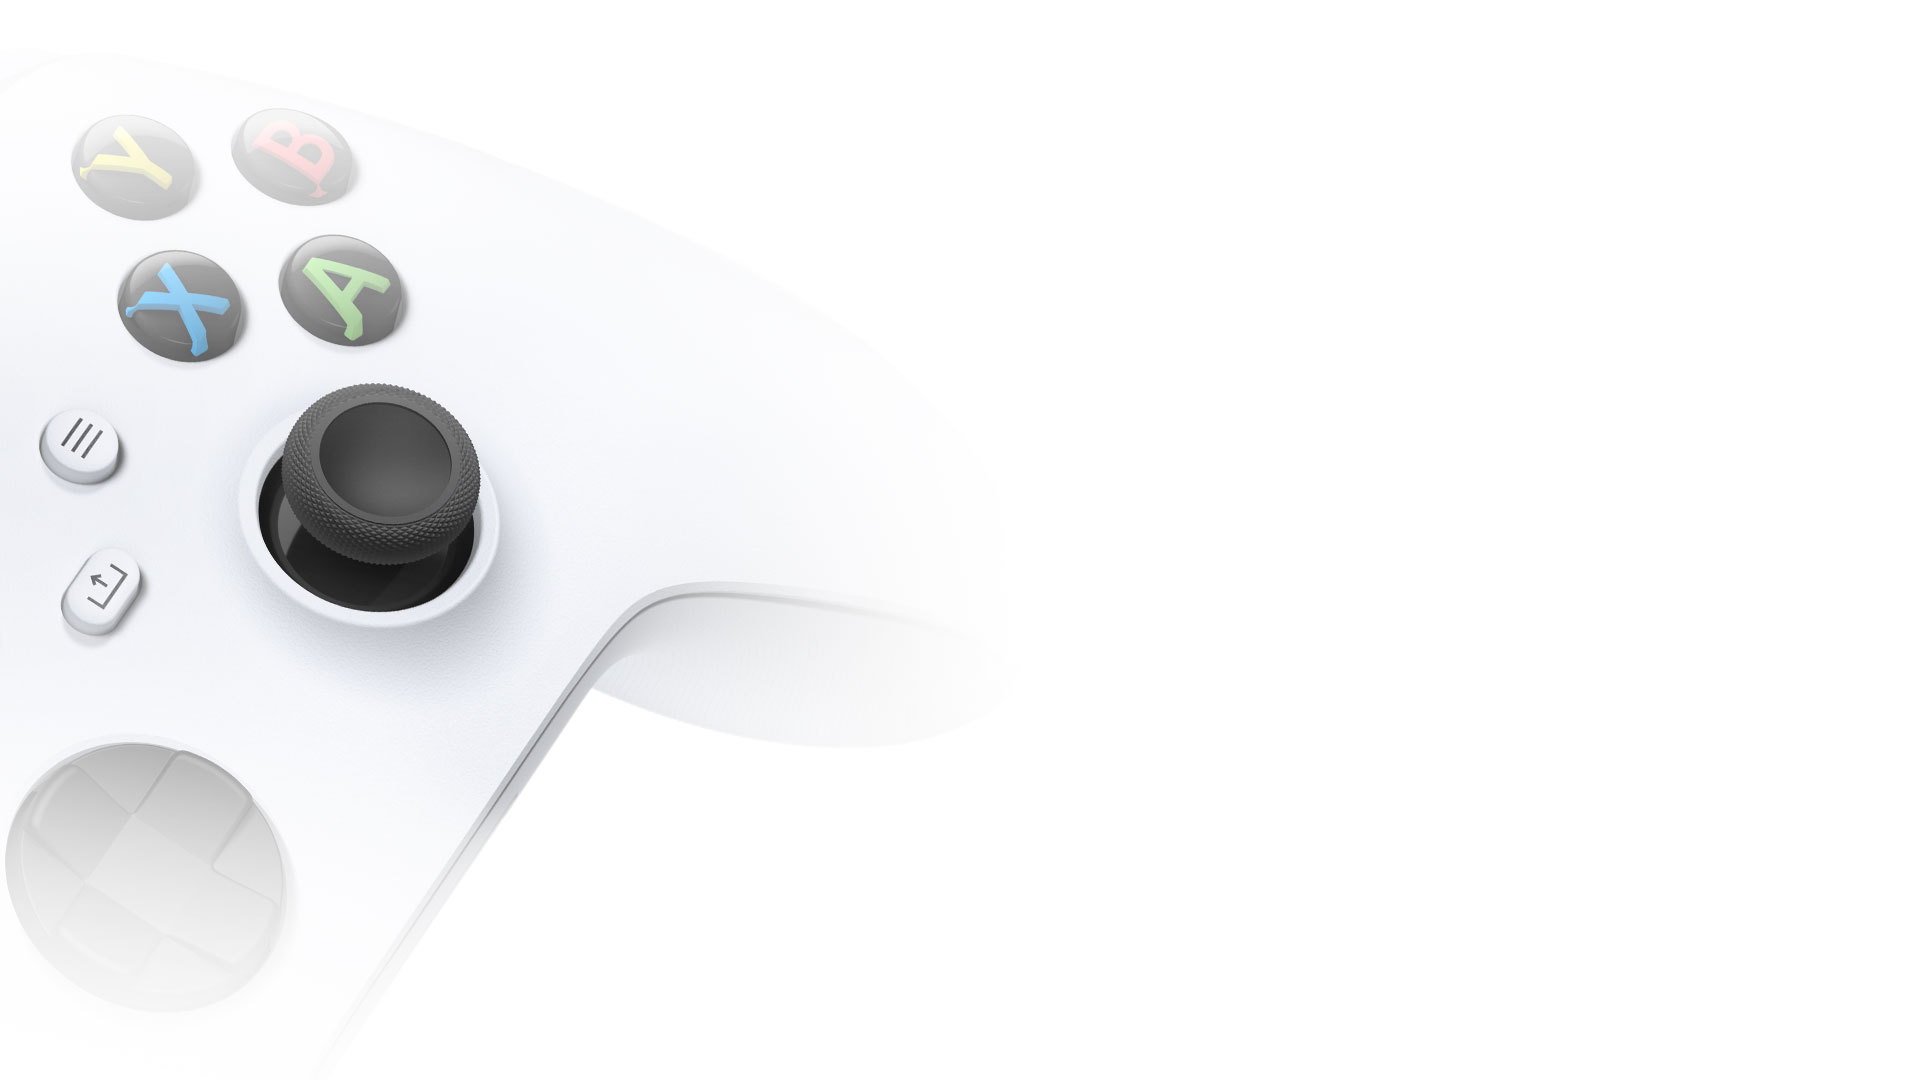 Front of the Xbox Wireless Controller - White